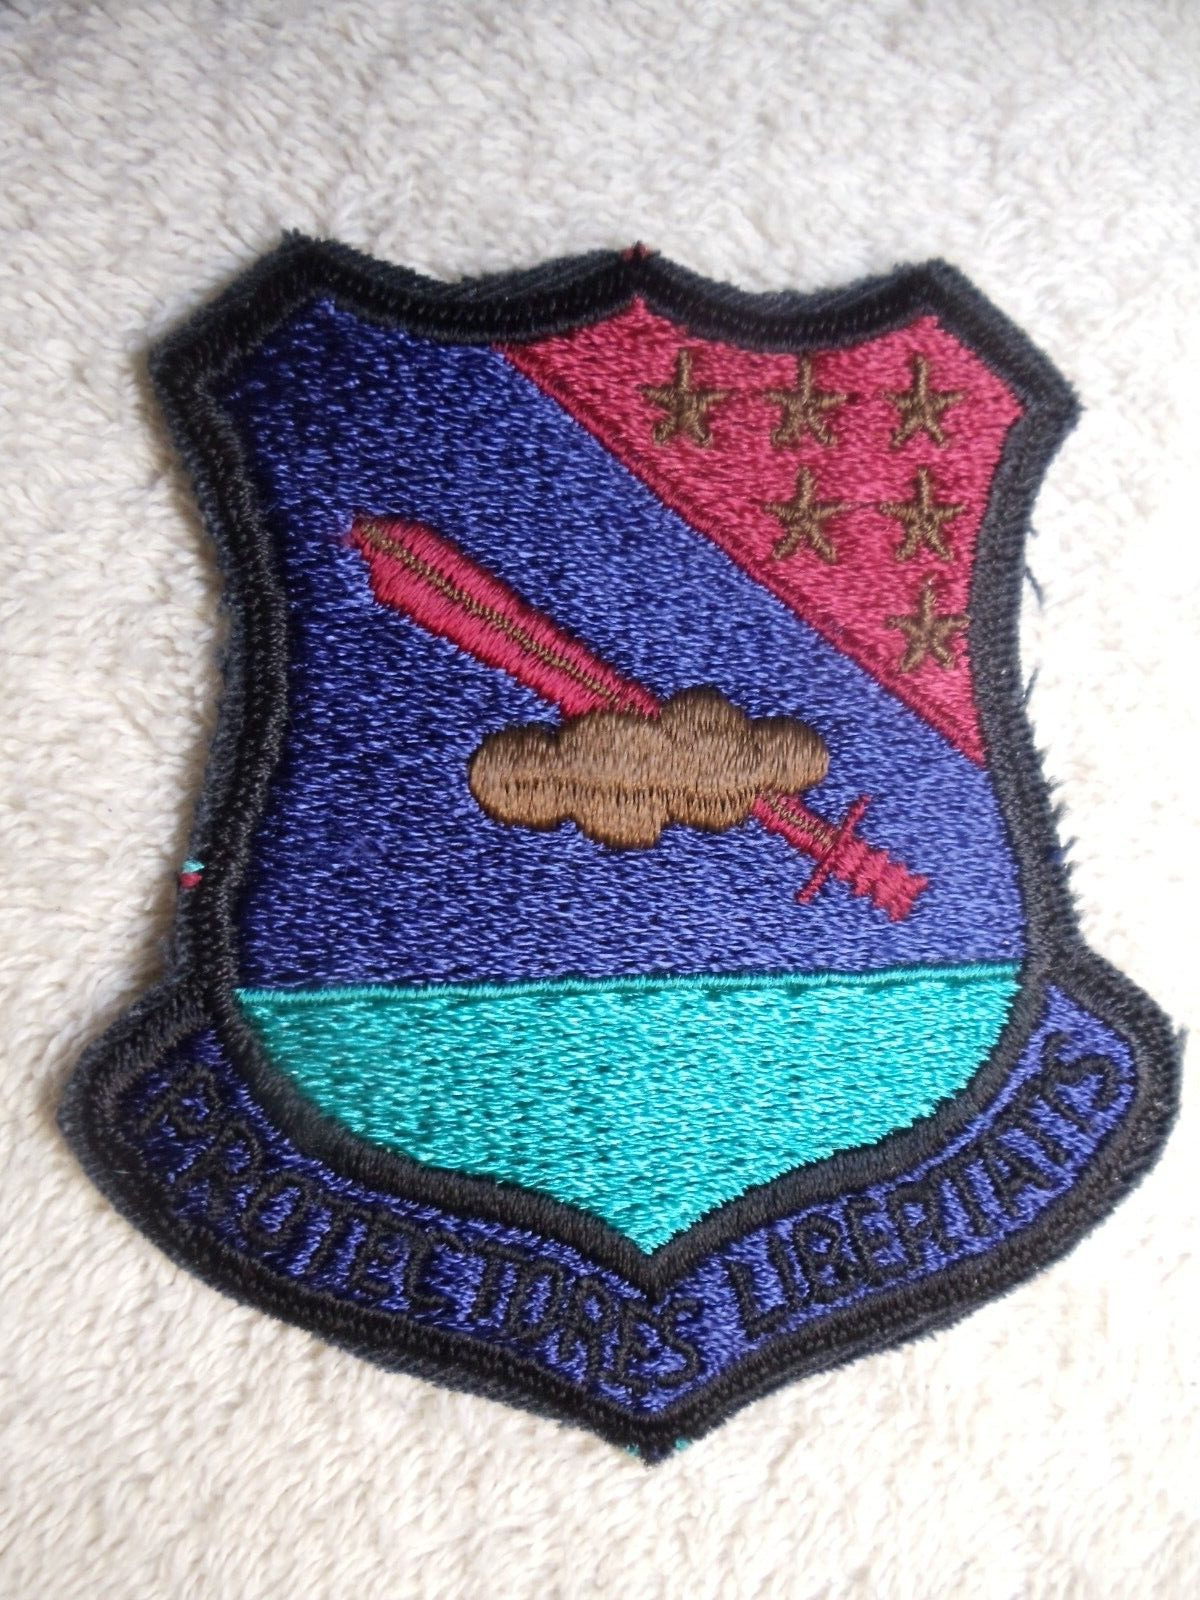 USAF Air Force Patch: 479th Tactical Fighter Wing HOLLOMAN AFB, NM 